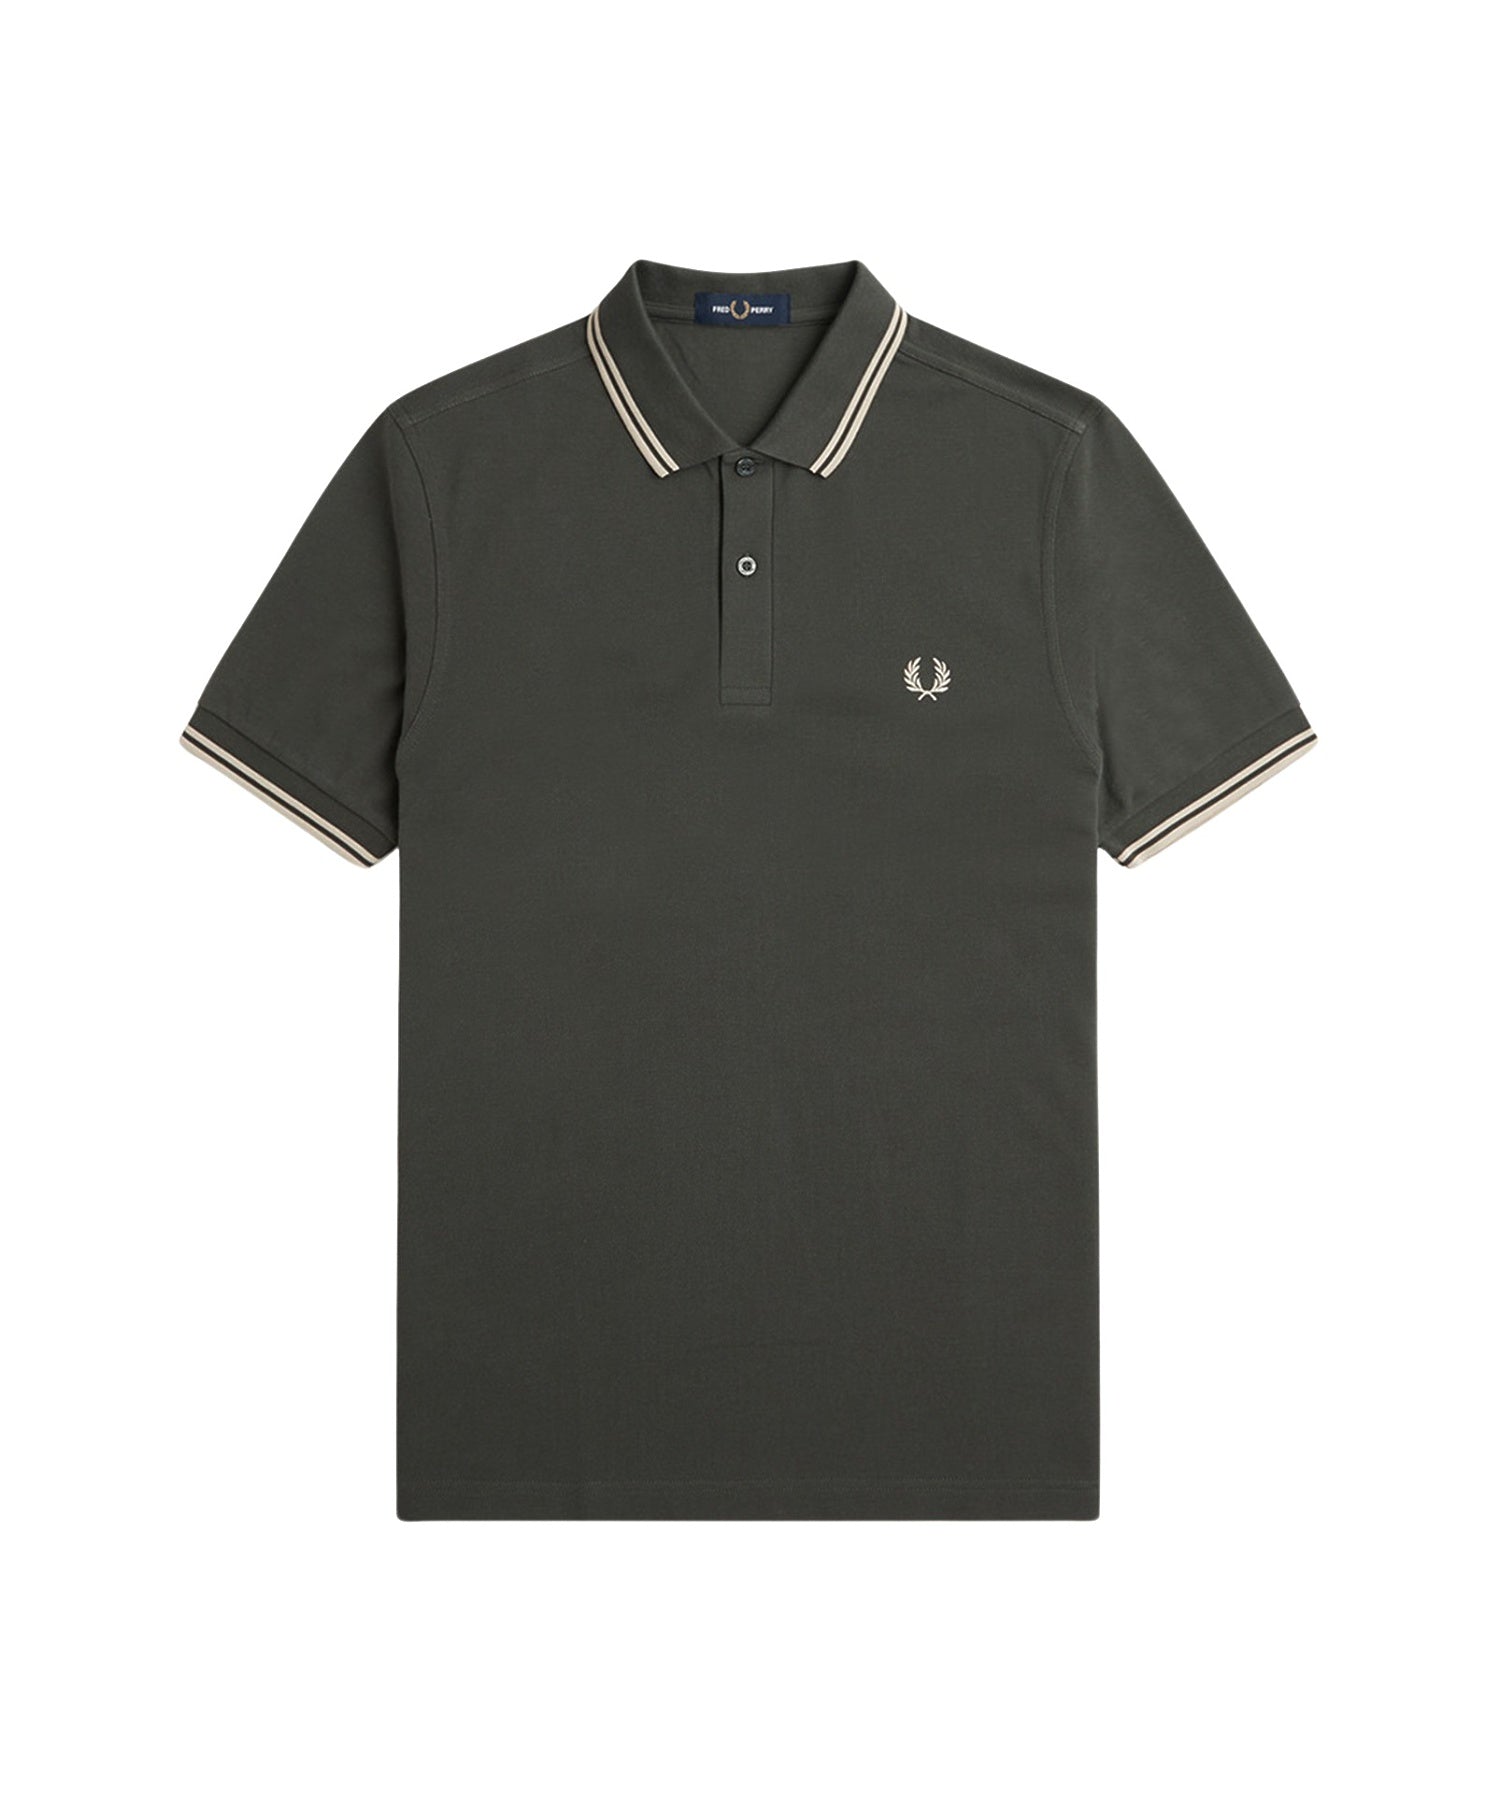 FRED PERRY/フレッドペリー/TWIN TIPPED FRED PERRY SHIRT/M3600/U98